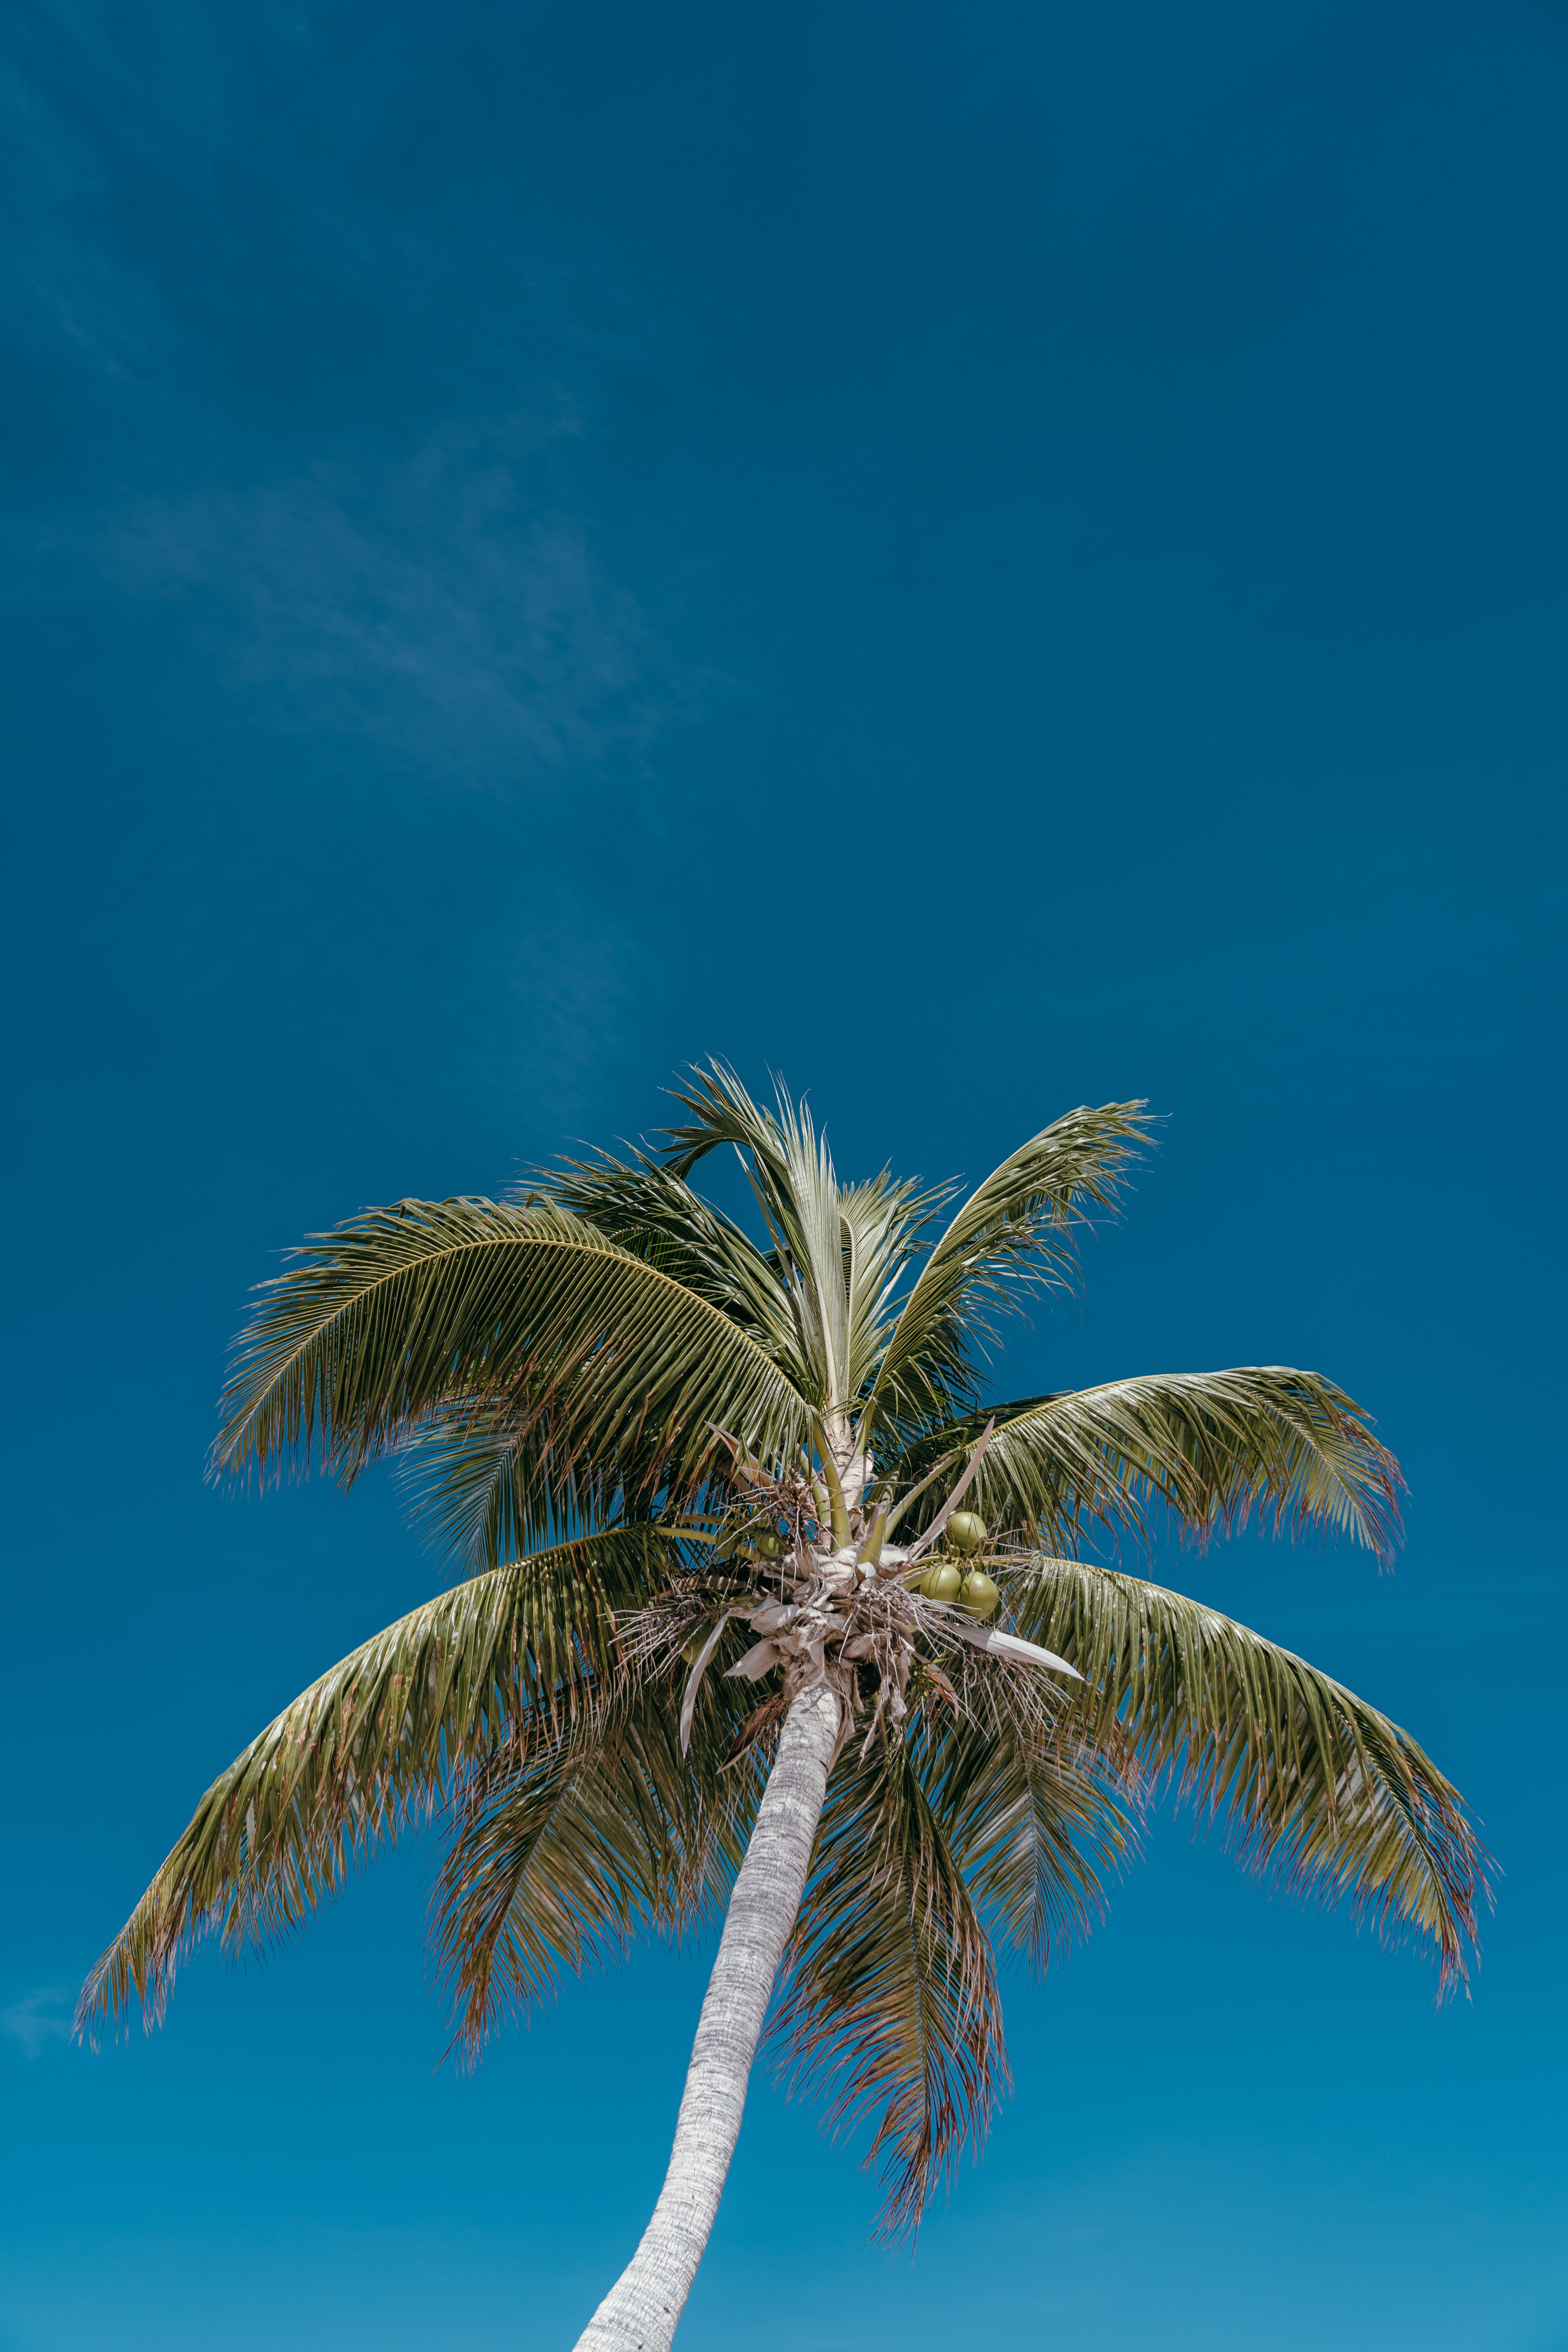 General 4000x6000 sky plants trees palm trees portrait display simple background